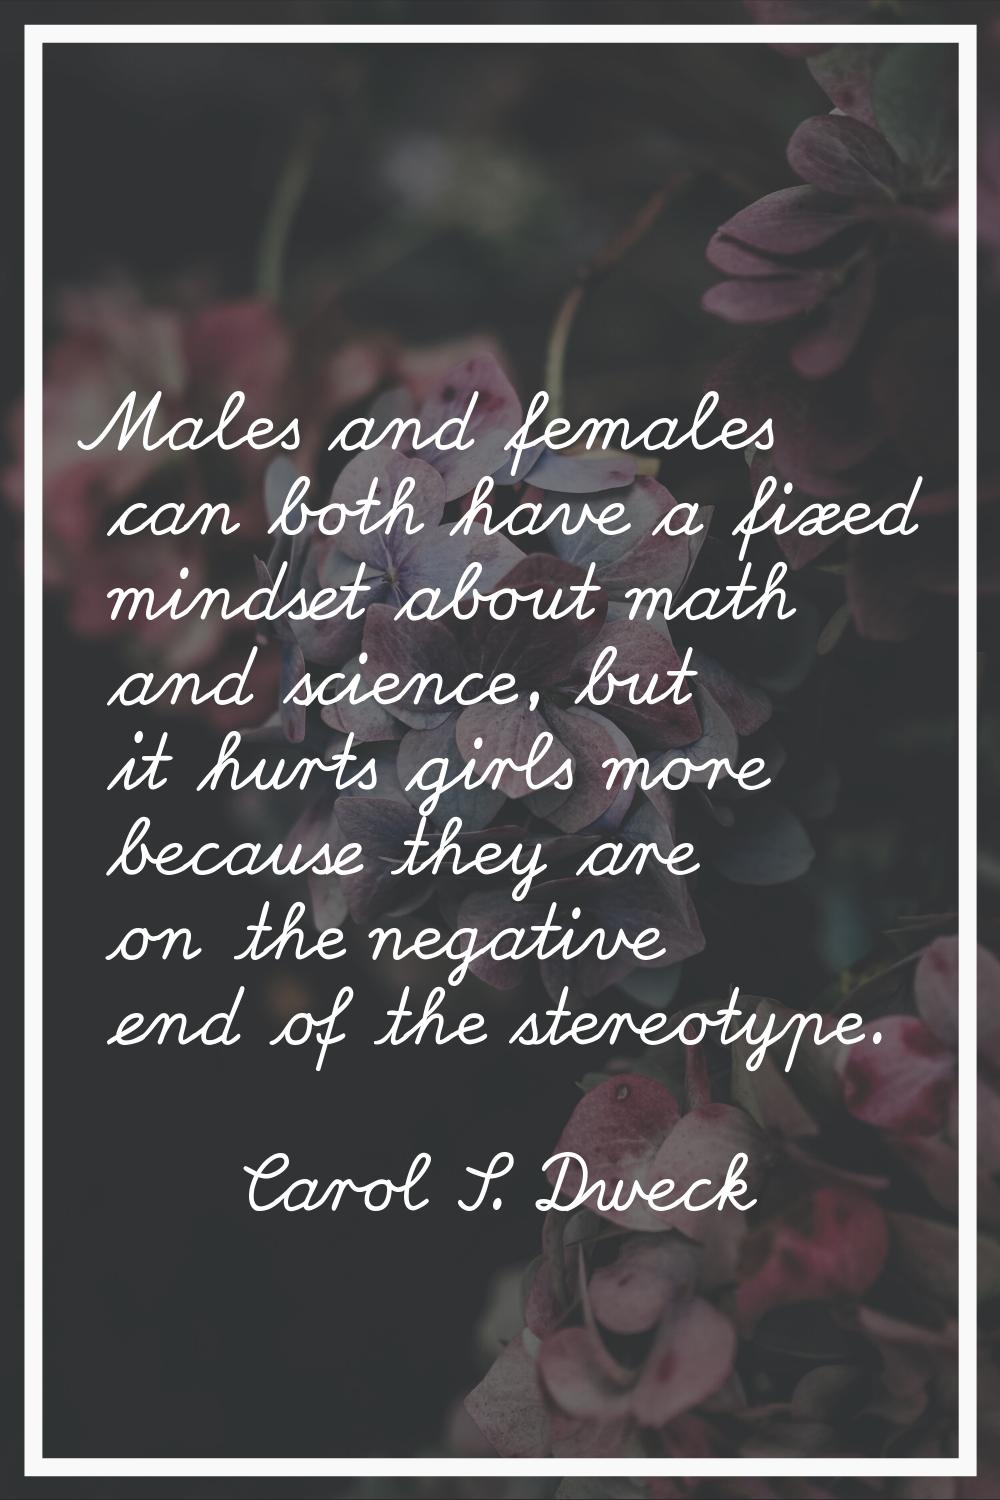 Males and females can both have a fixed mindset about math and science, but it hurts girls more bec